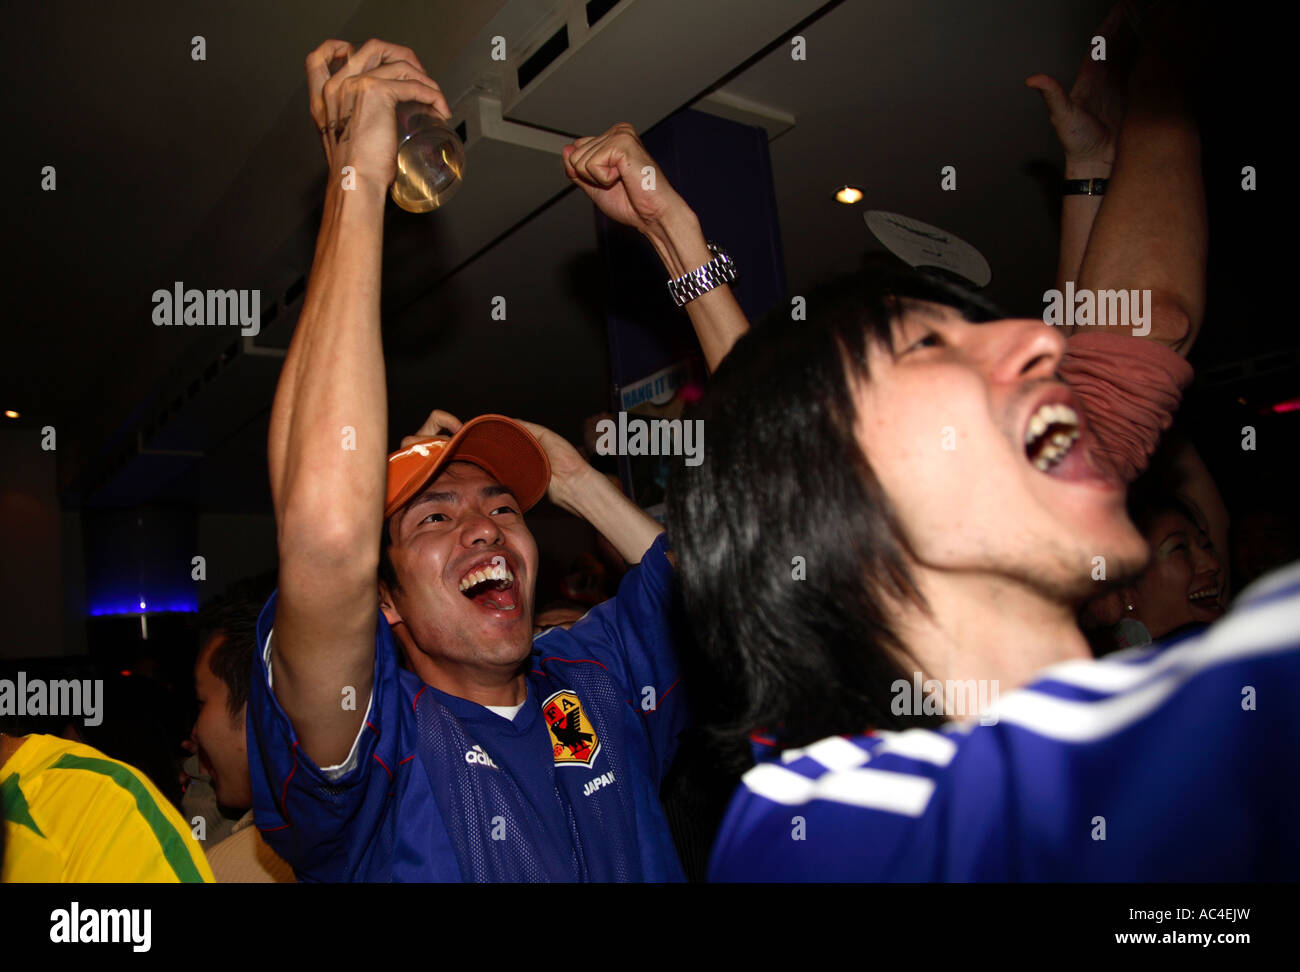 Japanese fans celebrate their goal in 1-4 defeat vs Brazil, 2006 World Cup Finals, Moon Under Water bar, London Stock Photo